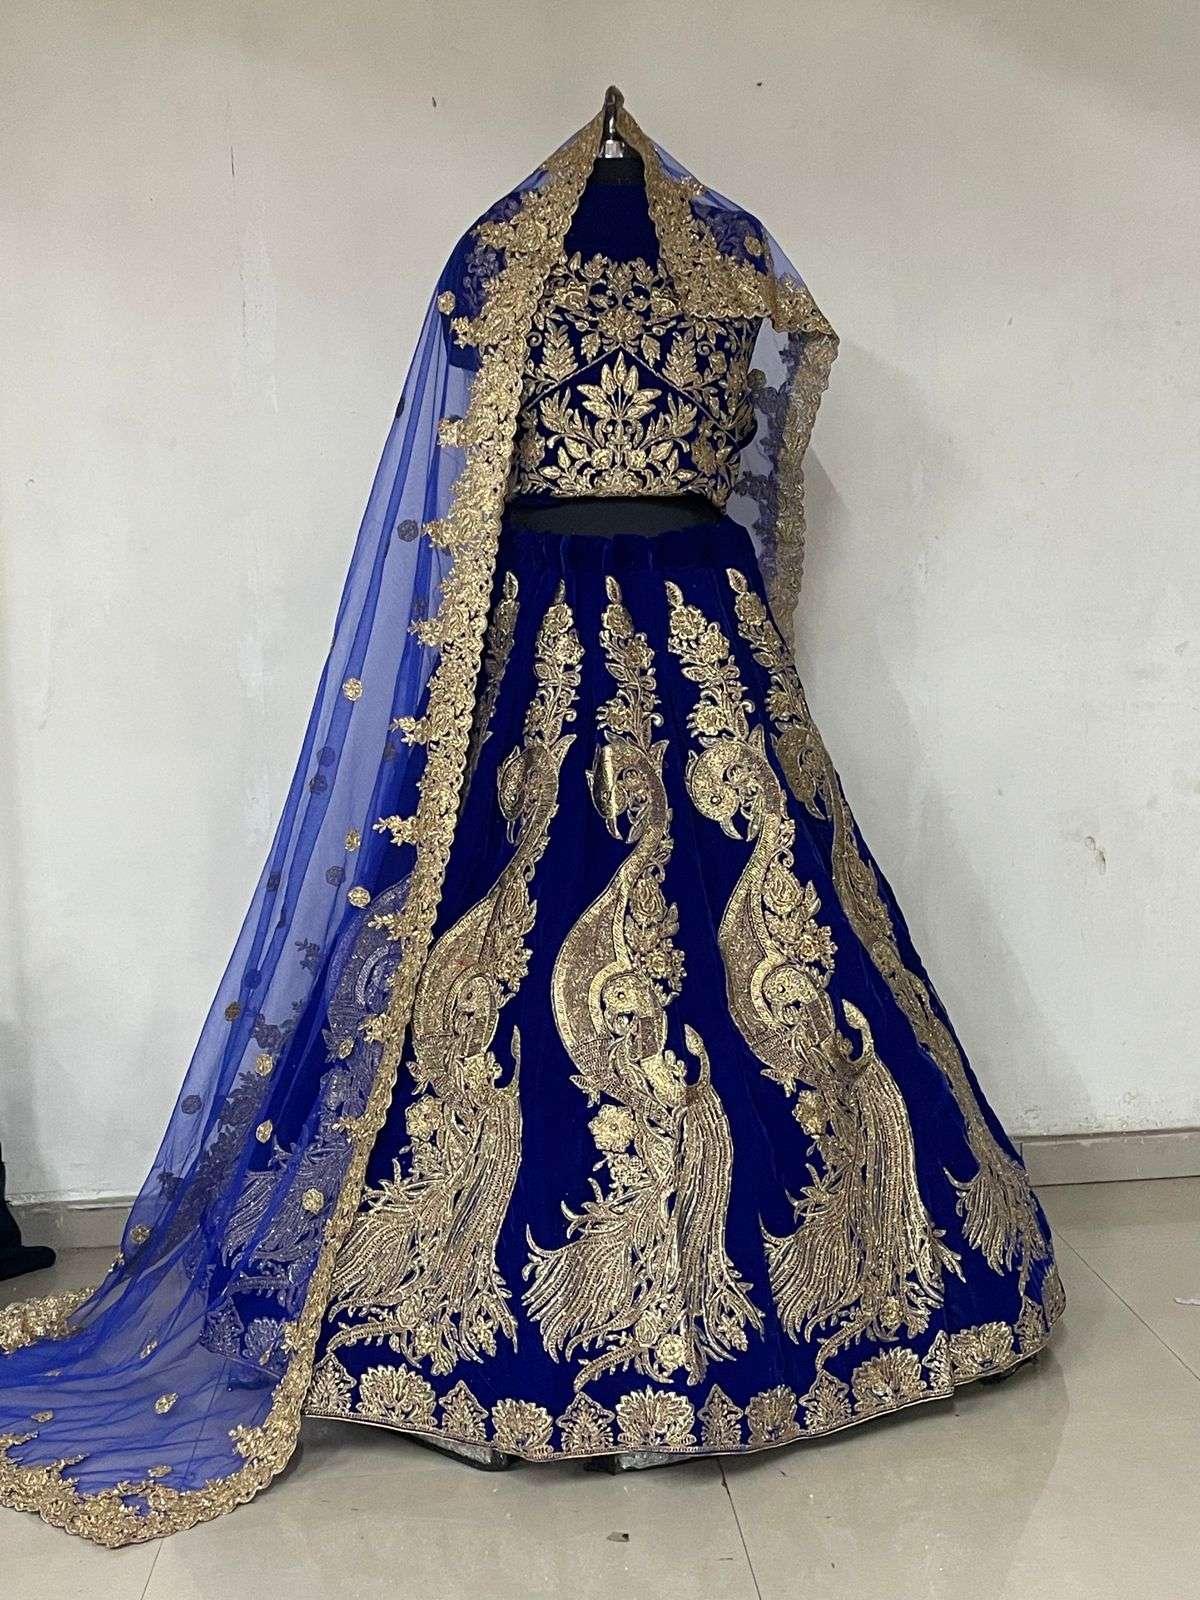 KB HIT DESIGN 1064 COLOURS BY FASHID WHOLESALE 1064-A TO 1064-D SERIES BRIDAL WEAR COLLECTION BEAUTIFUL STYLISH COLORFUL FANCY PARTY WEAR & OCCASIONAL WEAR HEAVY VELVET LEHENGAS AT WHOLESALE PRICE